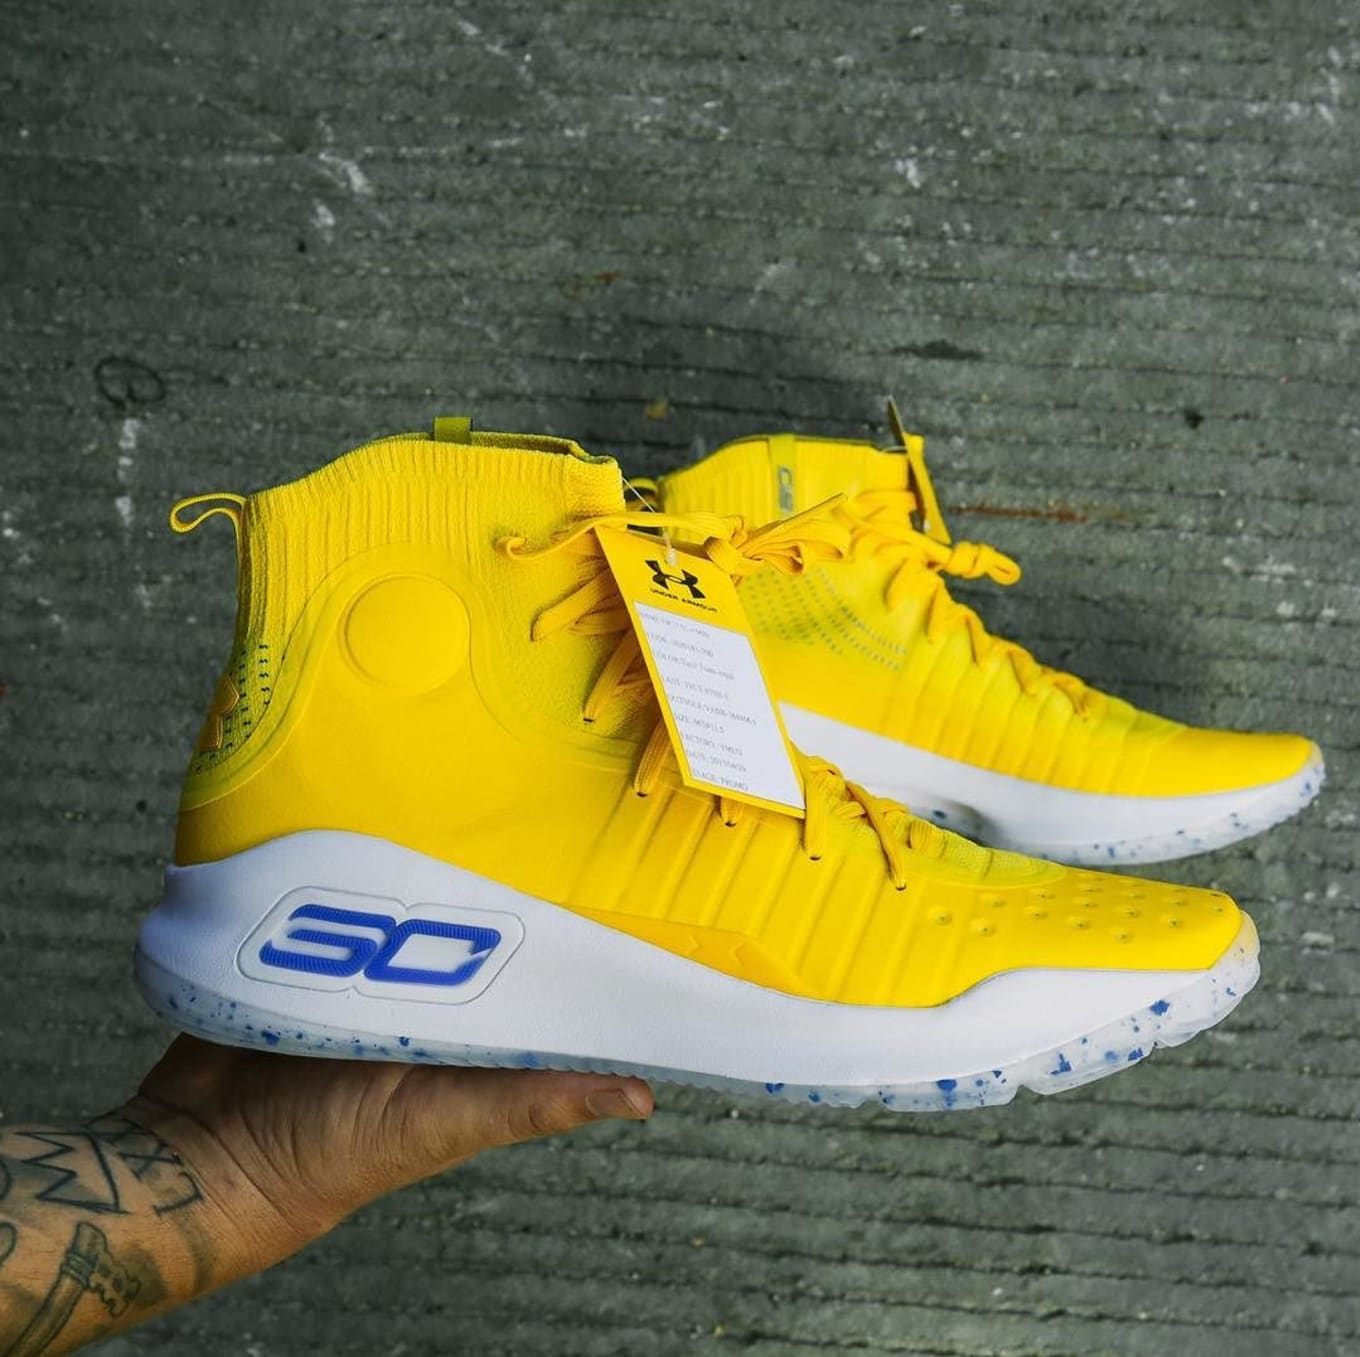 curry 4 yellow black